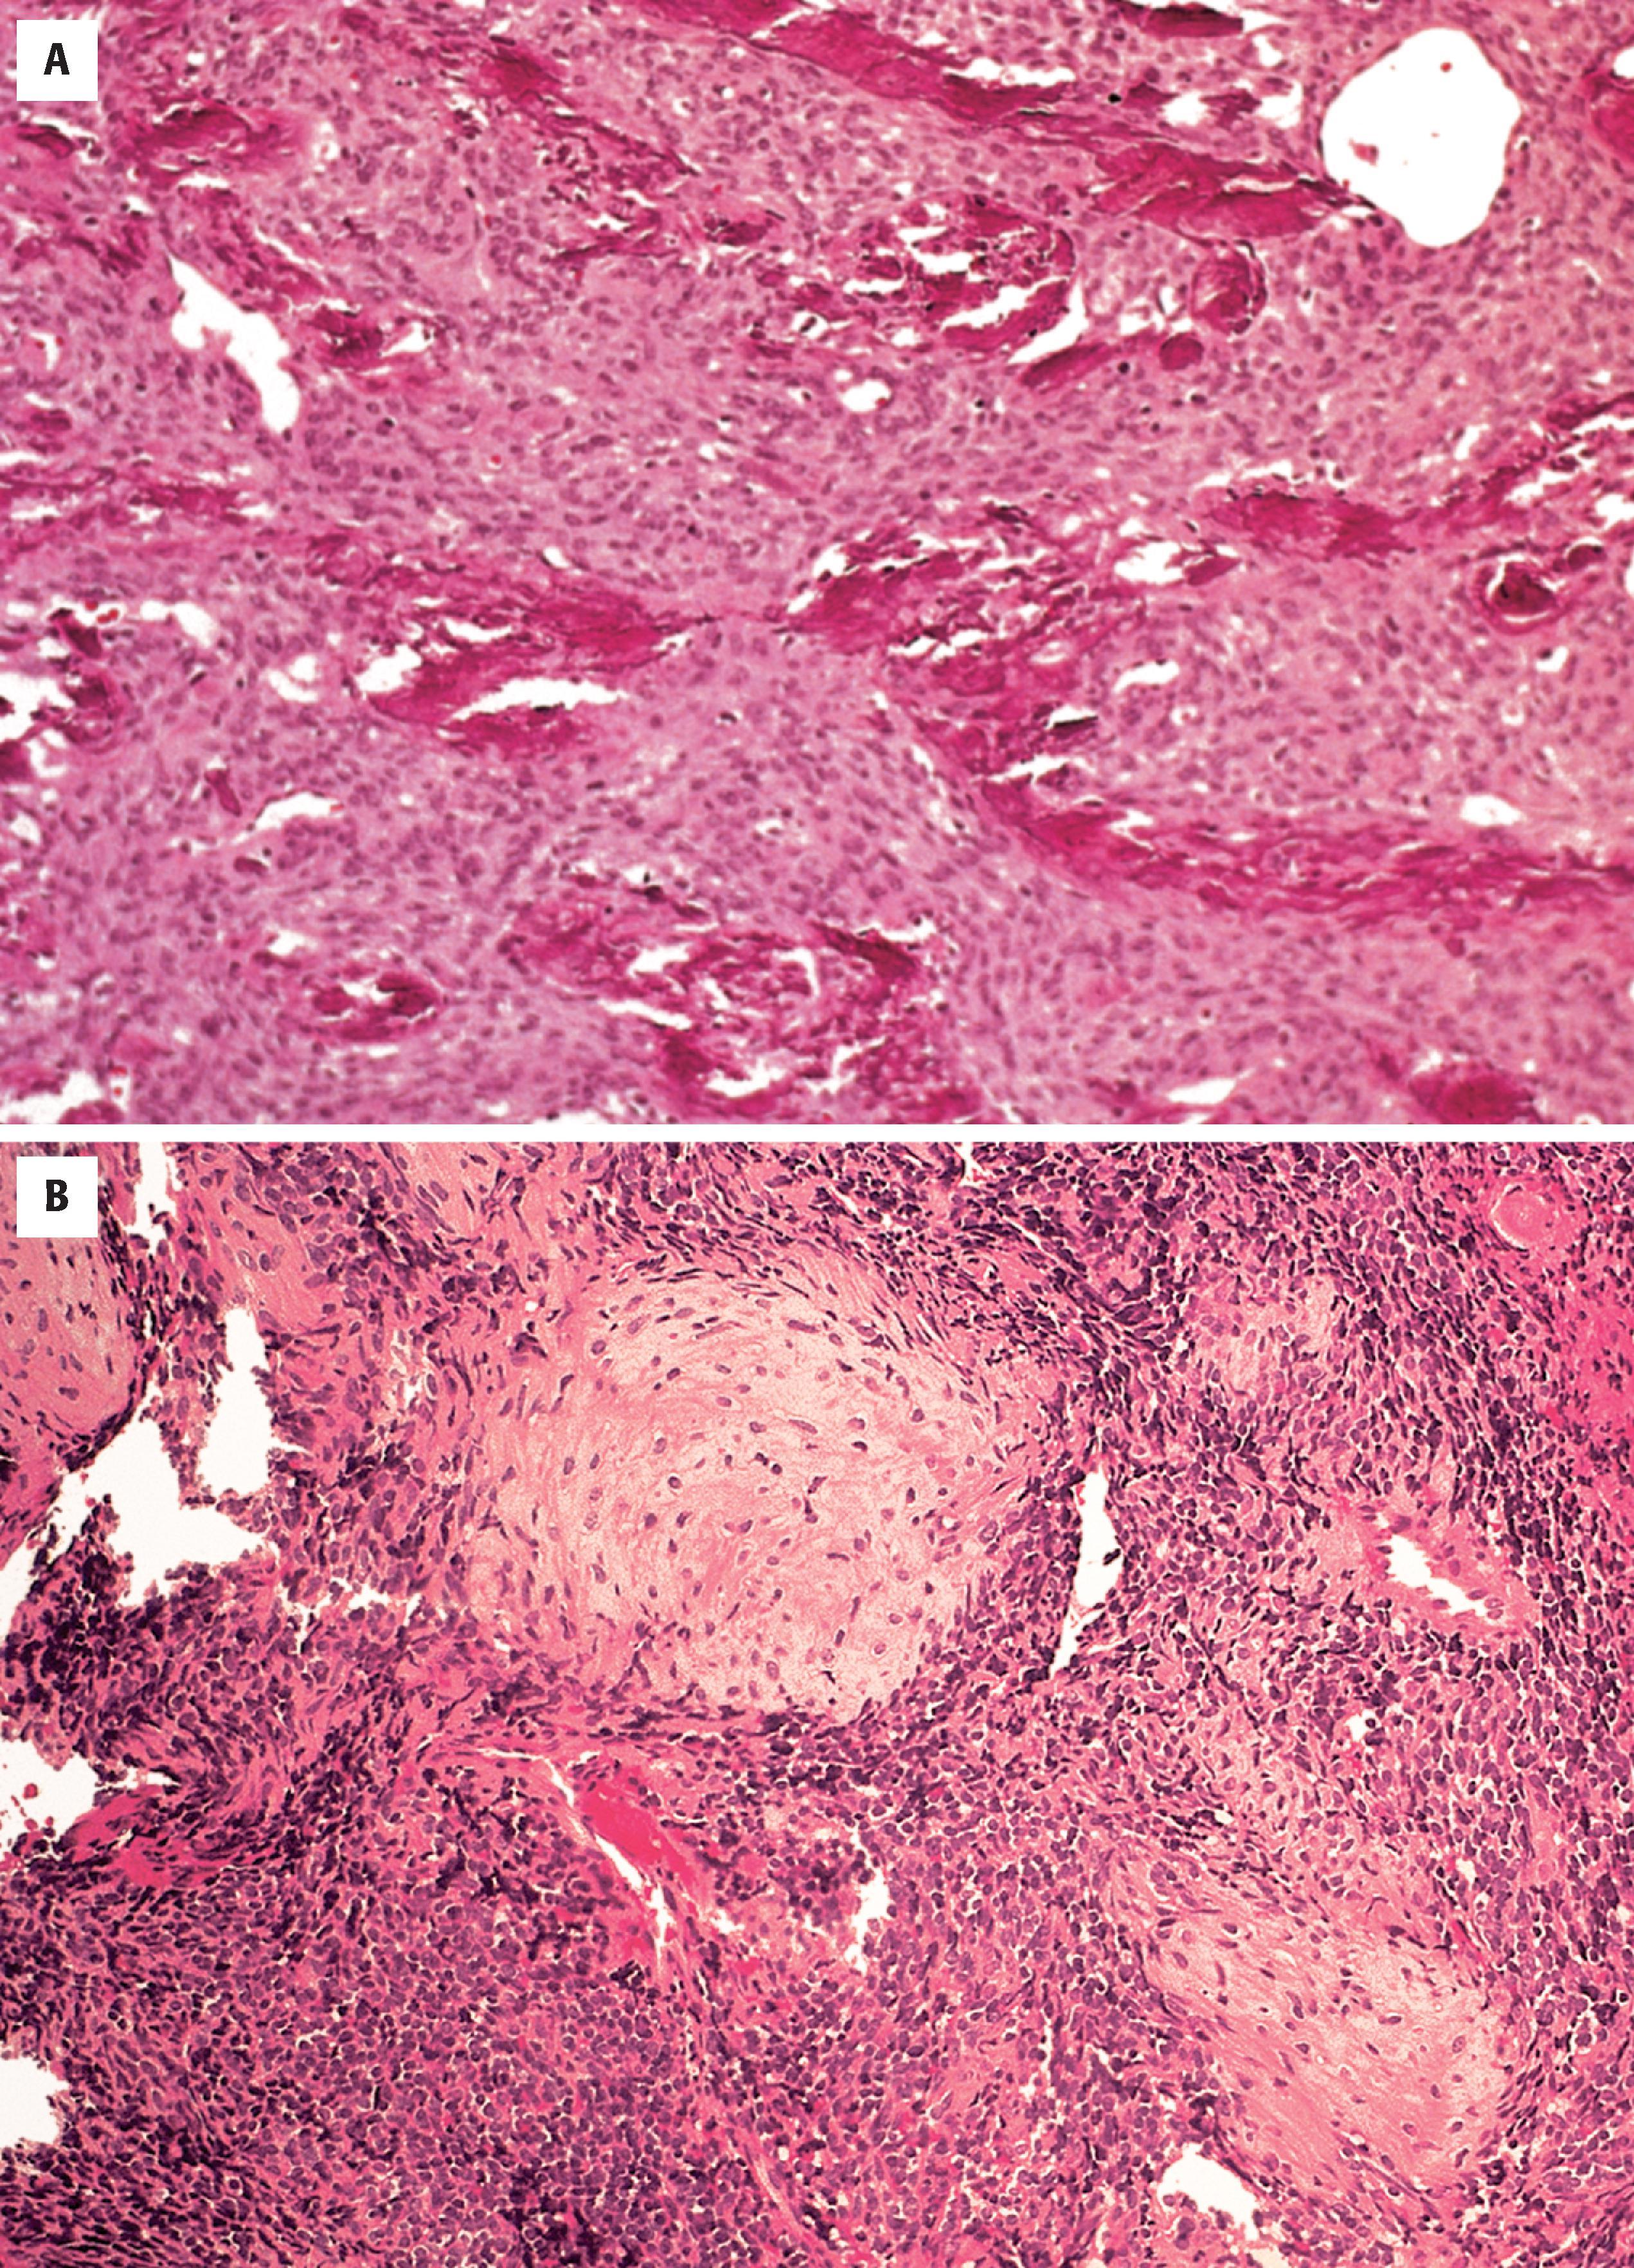 FIGURE 10.7, A, Abundant bone formation for the diagnosis of osteosarcoma. B, Focal chondroid differentiation in the background of otherwise undifferentiated tumor characterizes mesenchymal chondrosarcoma.